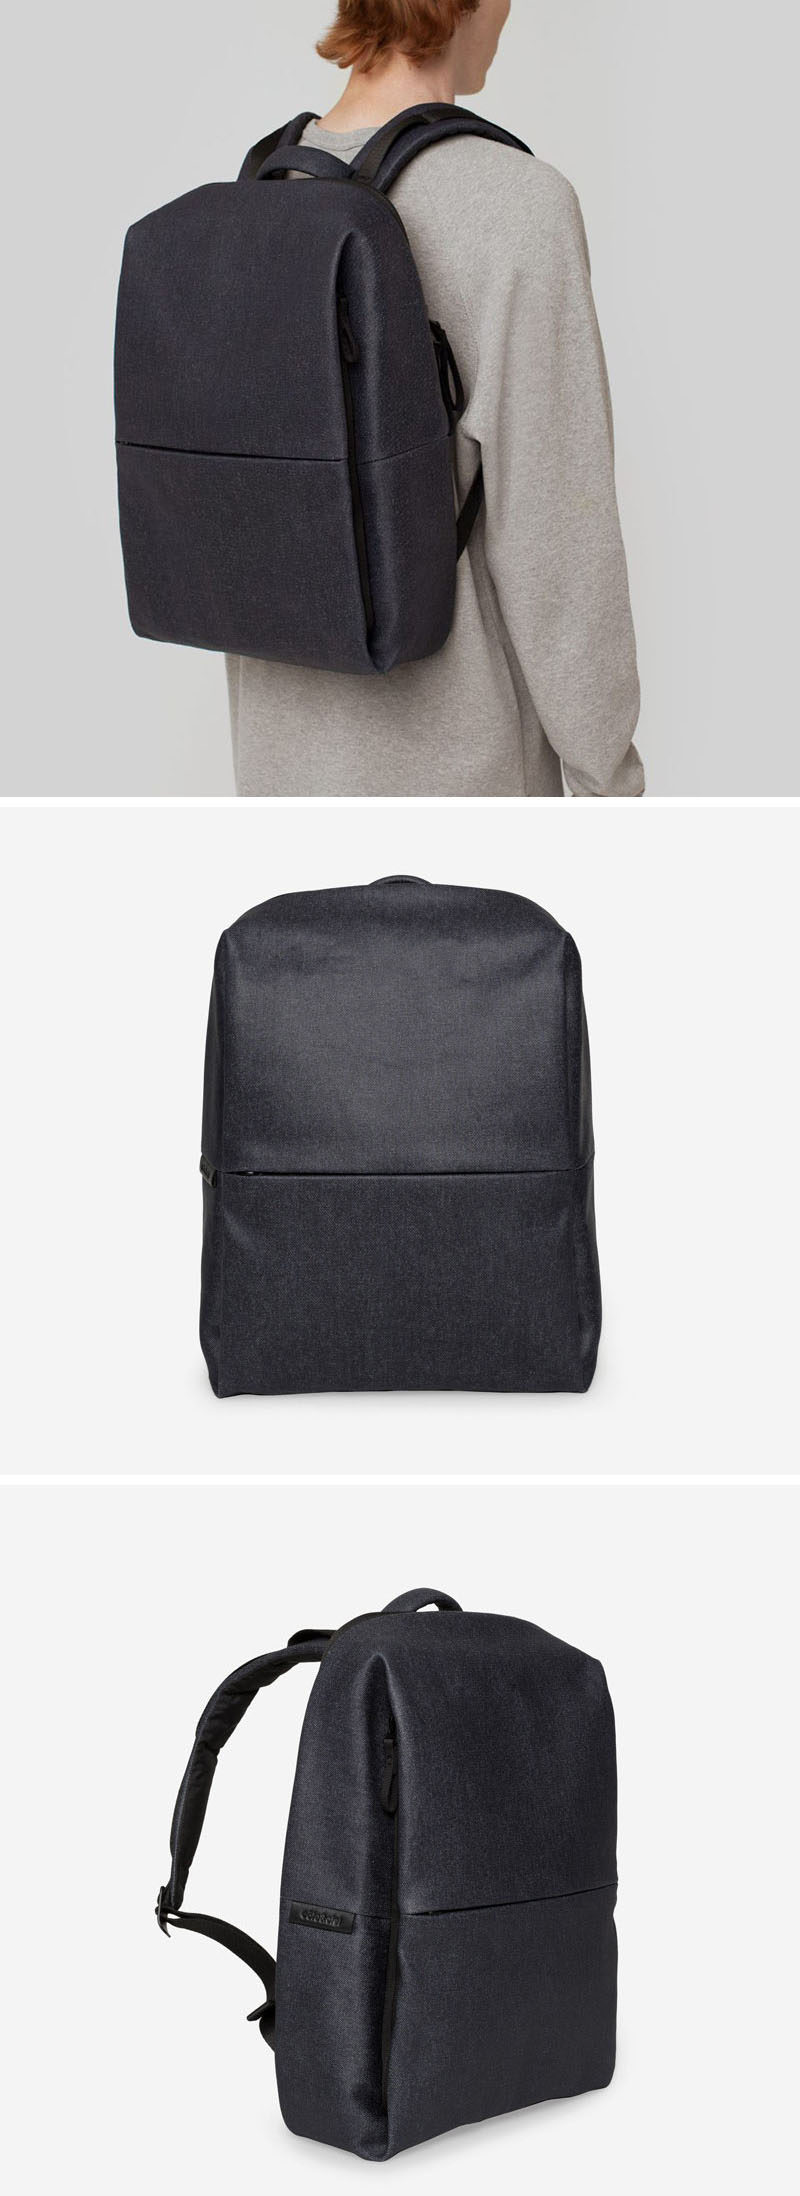 This minimalist blue denim backpack is designed to compress down to the thickness of a laptop when not in use, while also being able to expand to easily fit all your daily essentials.